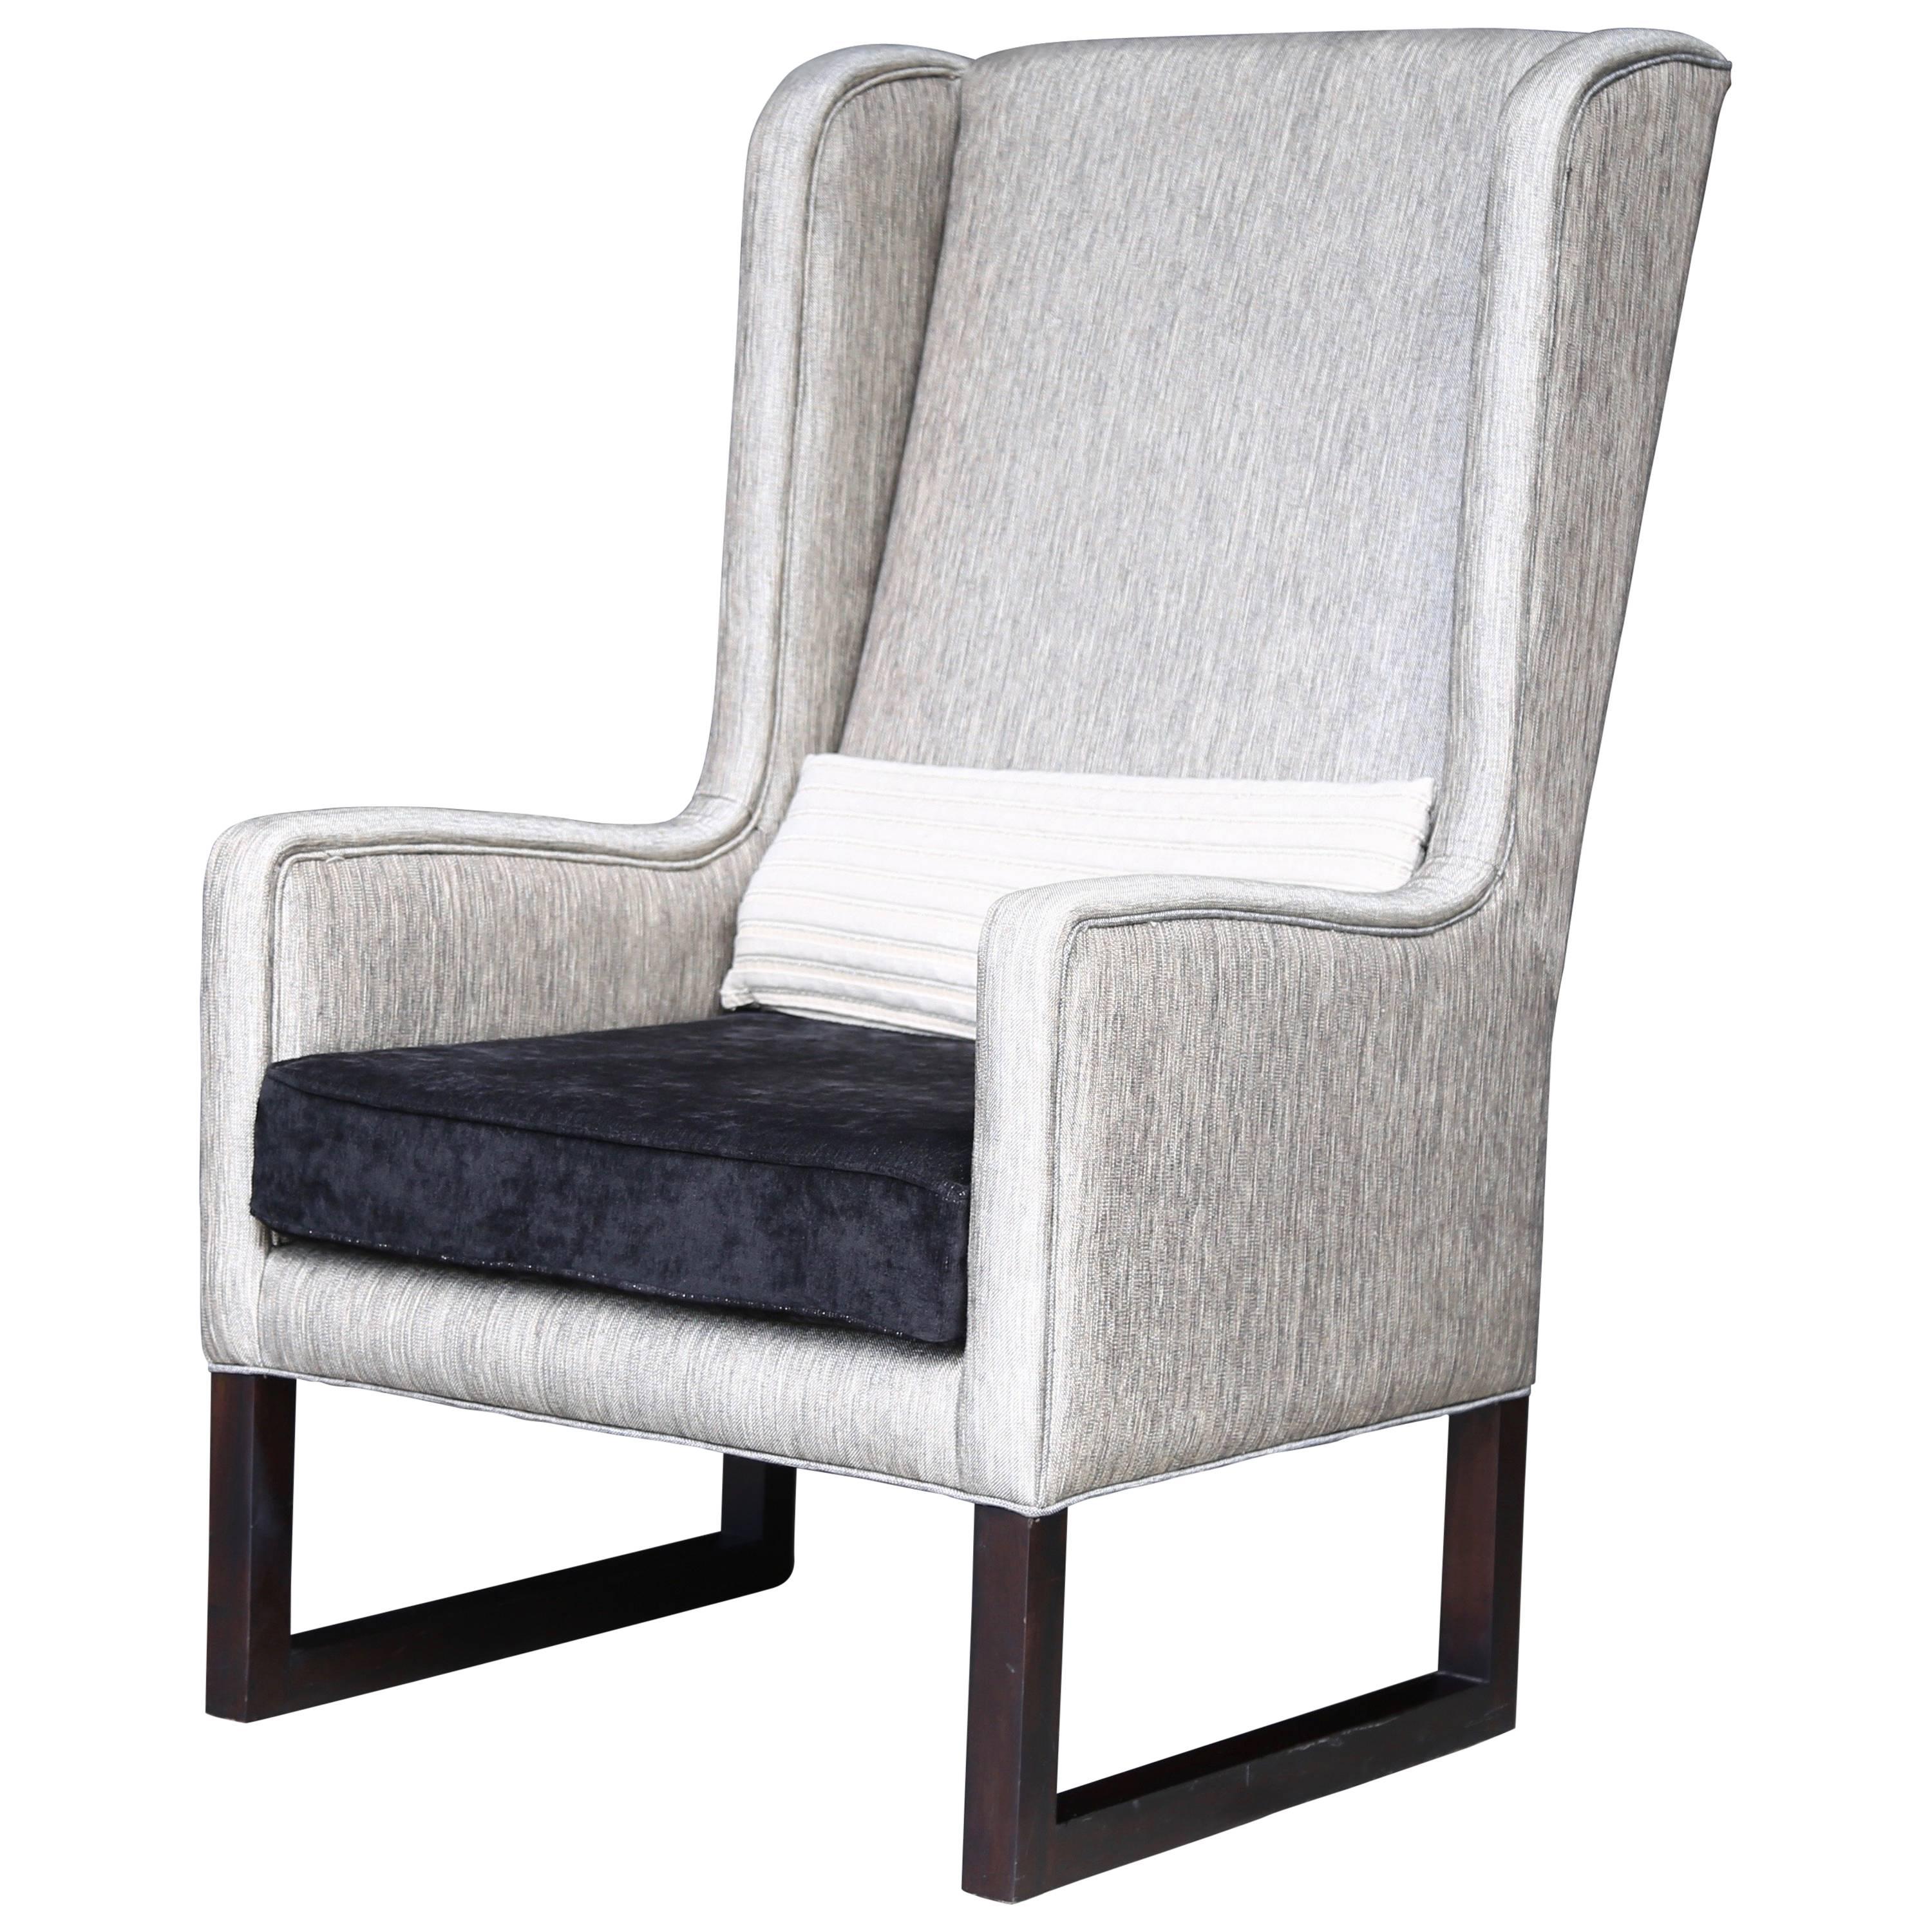 Modern High Back Upholstered Wing Chair from Costantini, Matteo